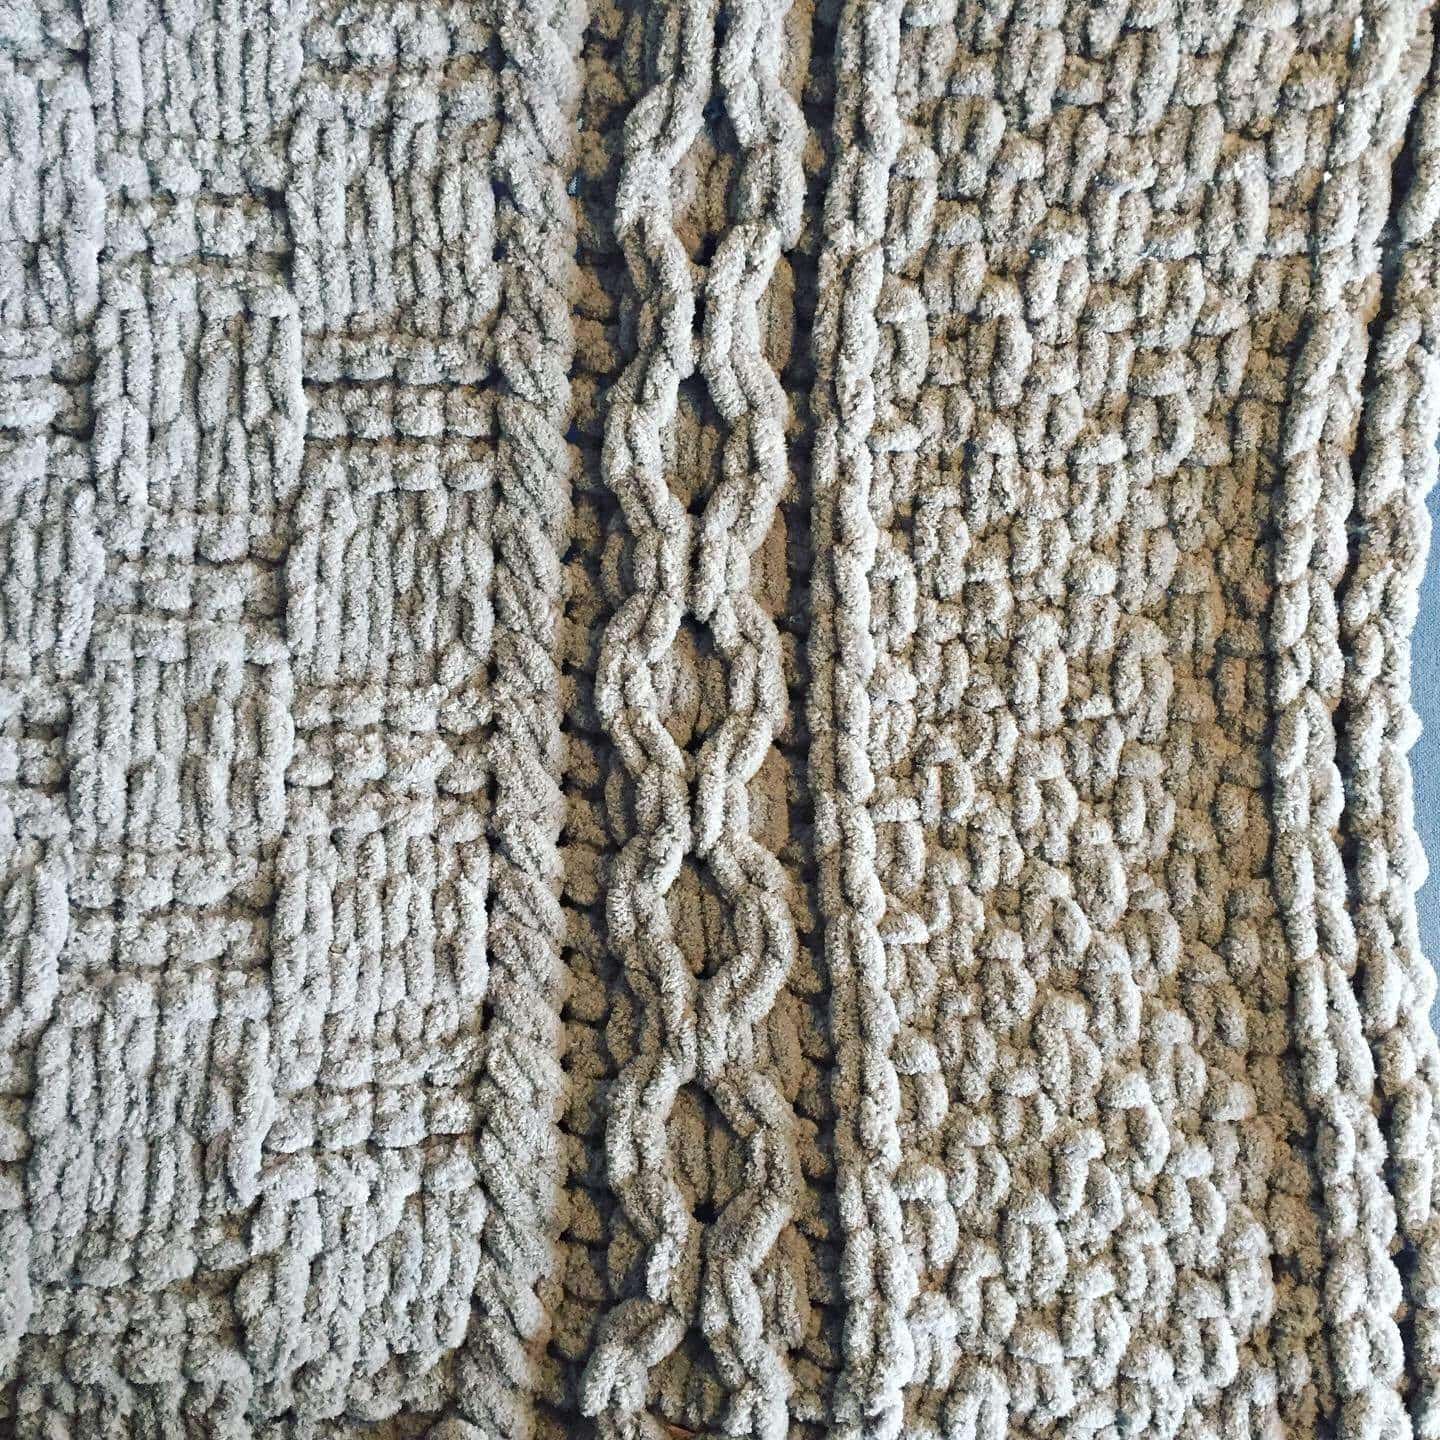 PATTERN: Checkerboard Cable Blanket - ILoveMyBlanket